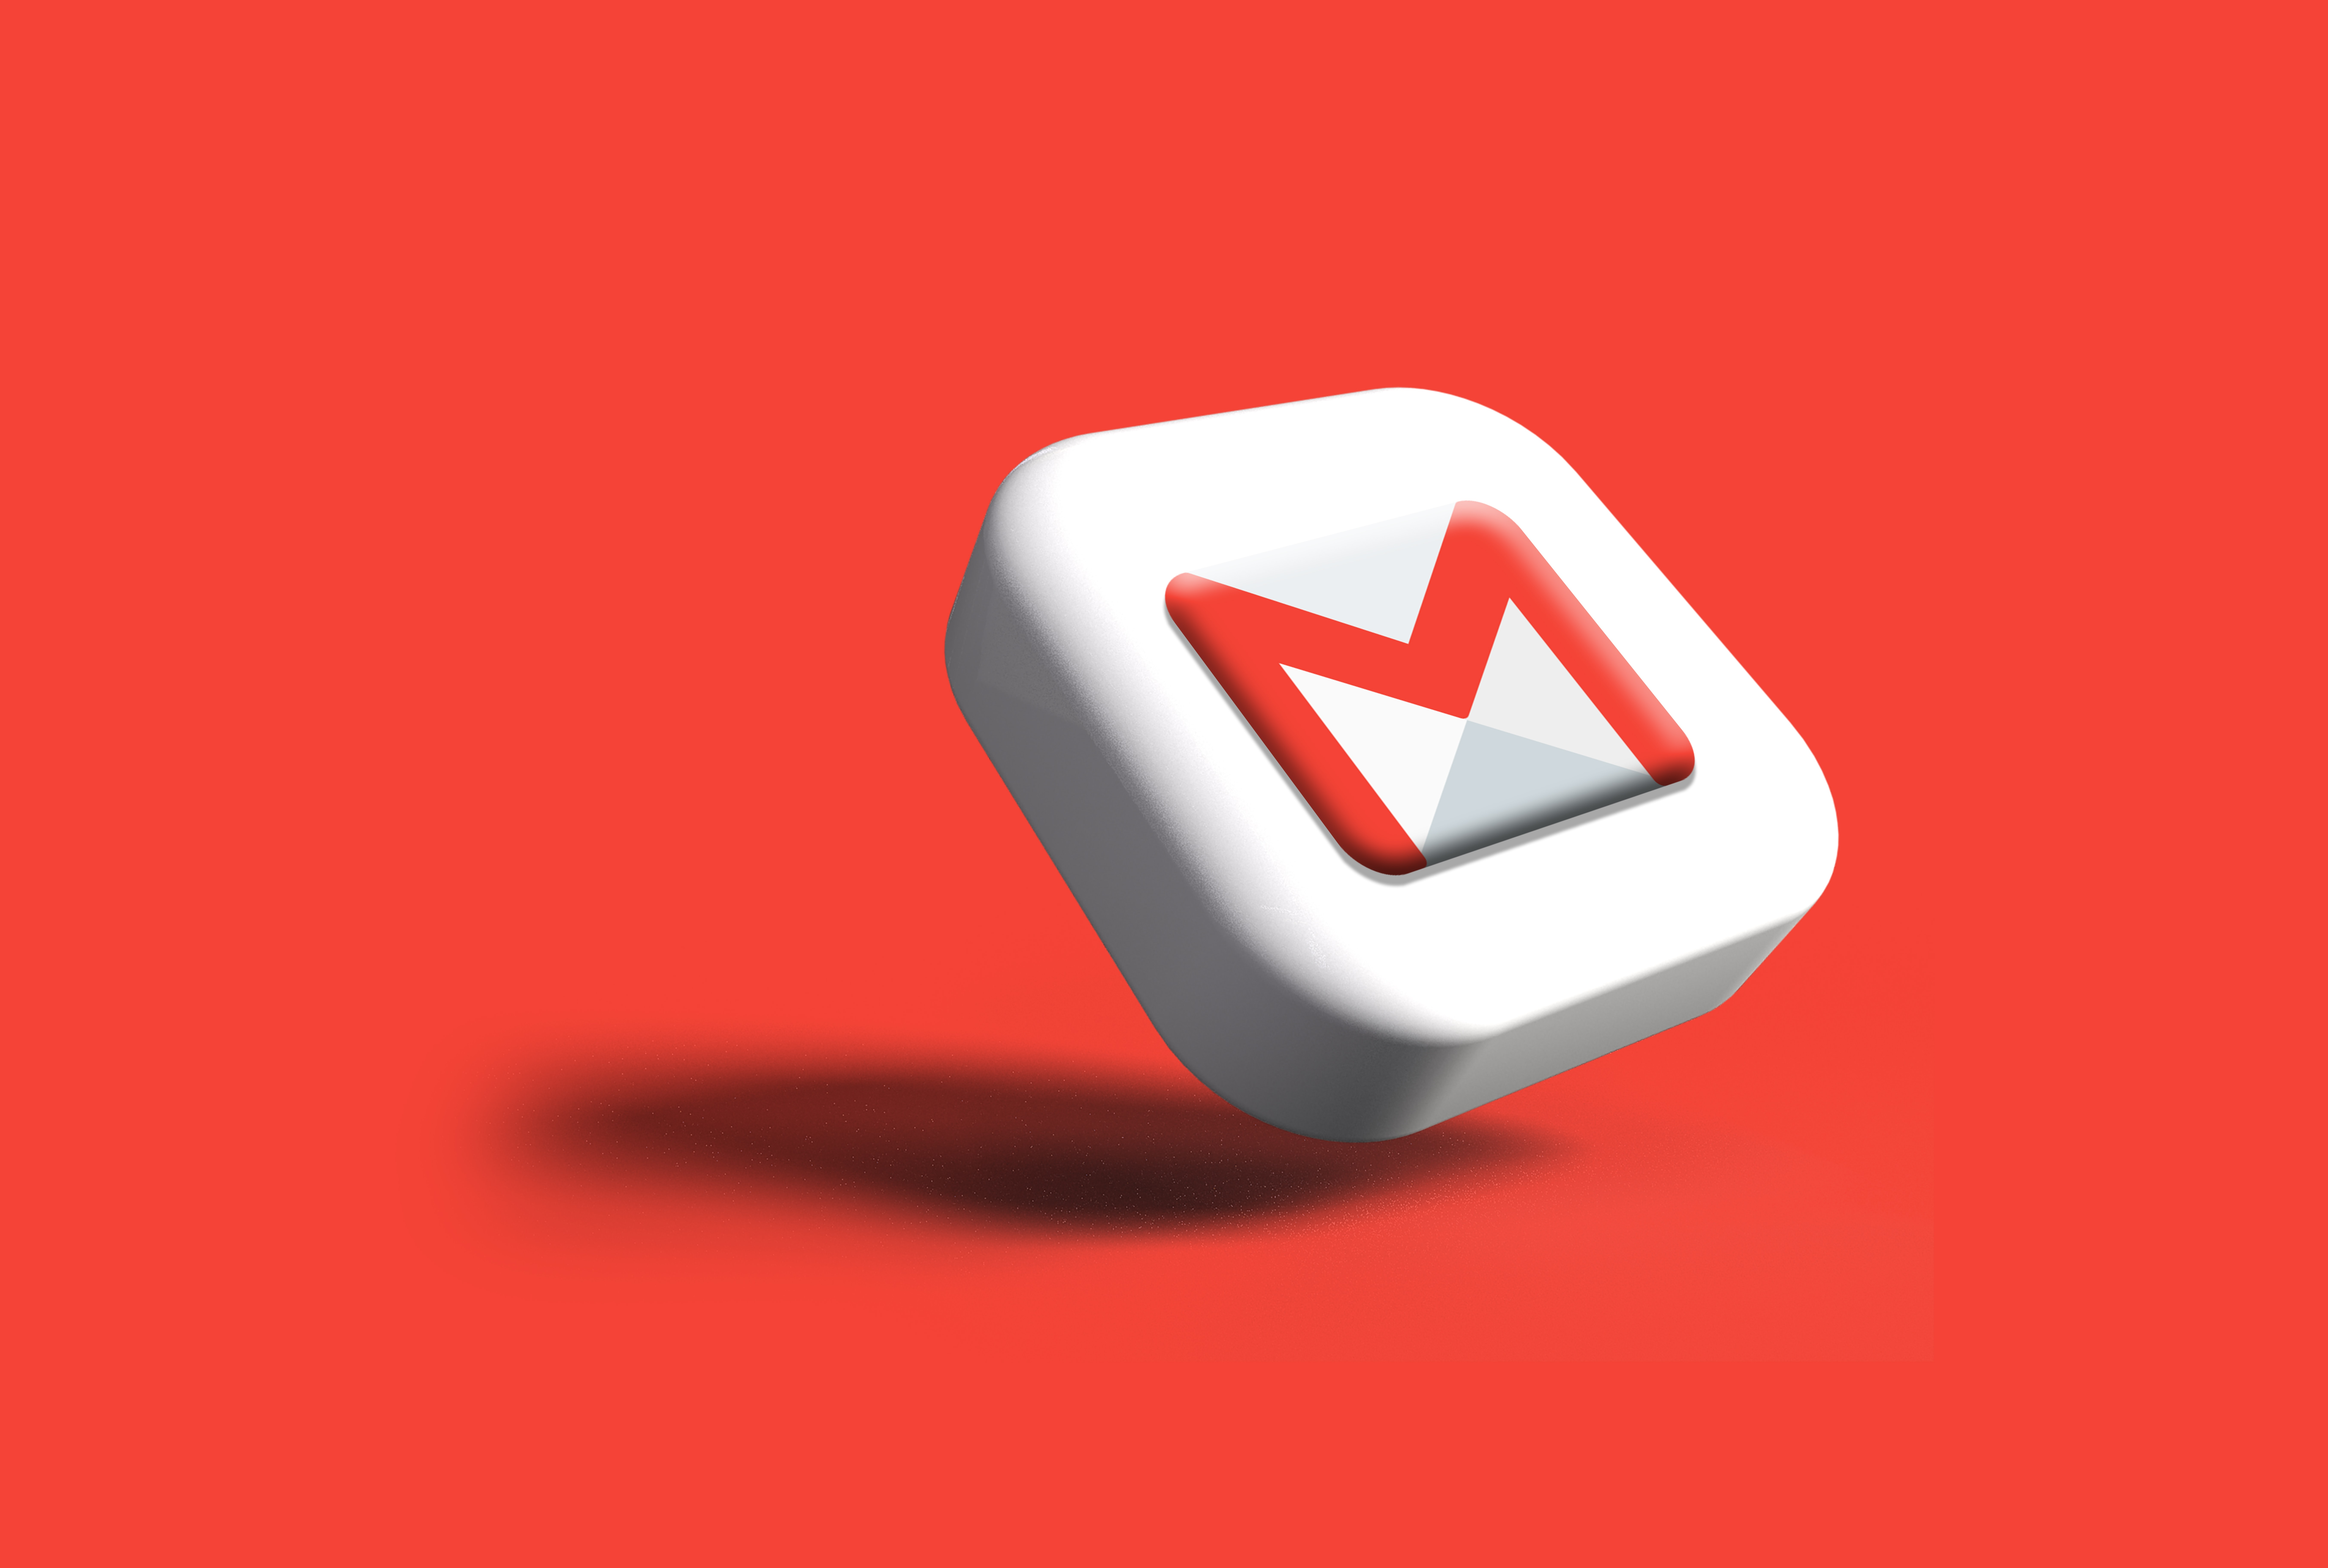 Gmail App on Android and iOS Gets a Handy ‘Storage Used’ Indicator like Google Photos